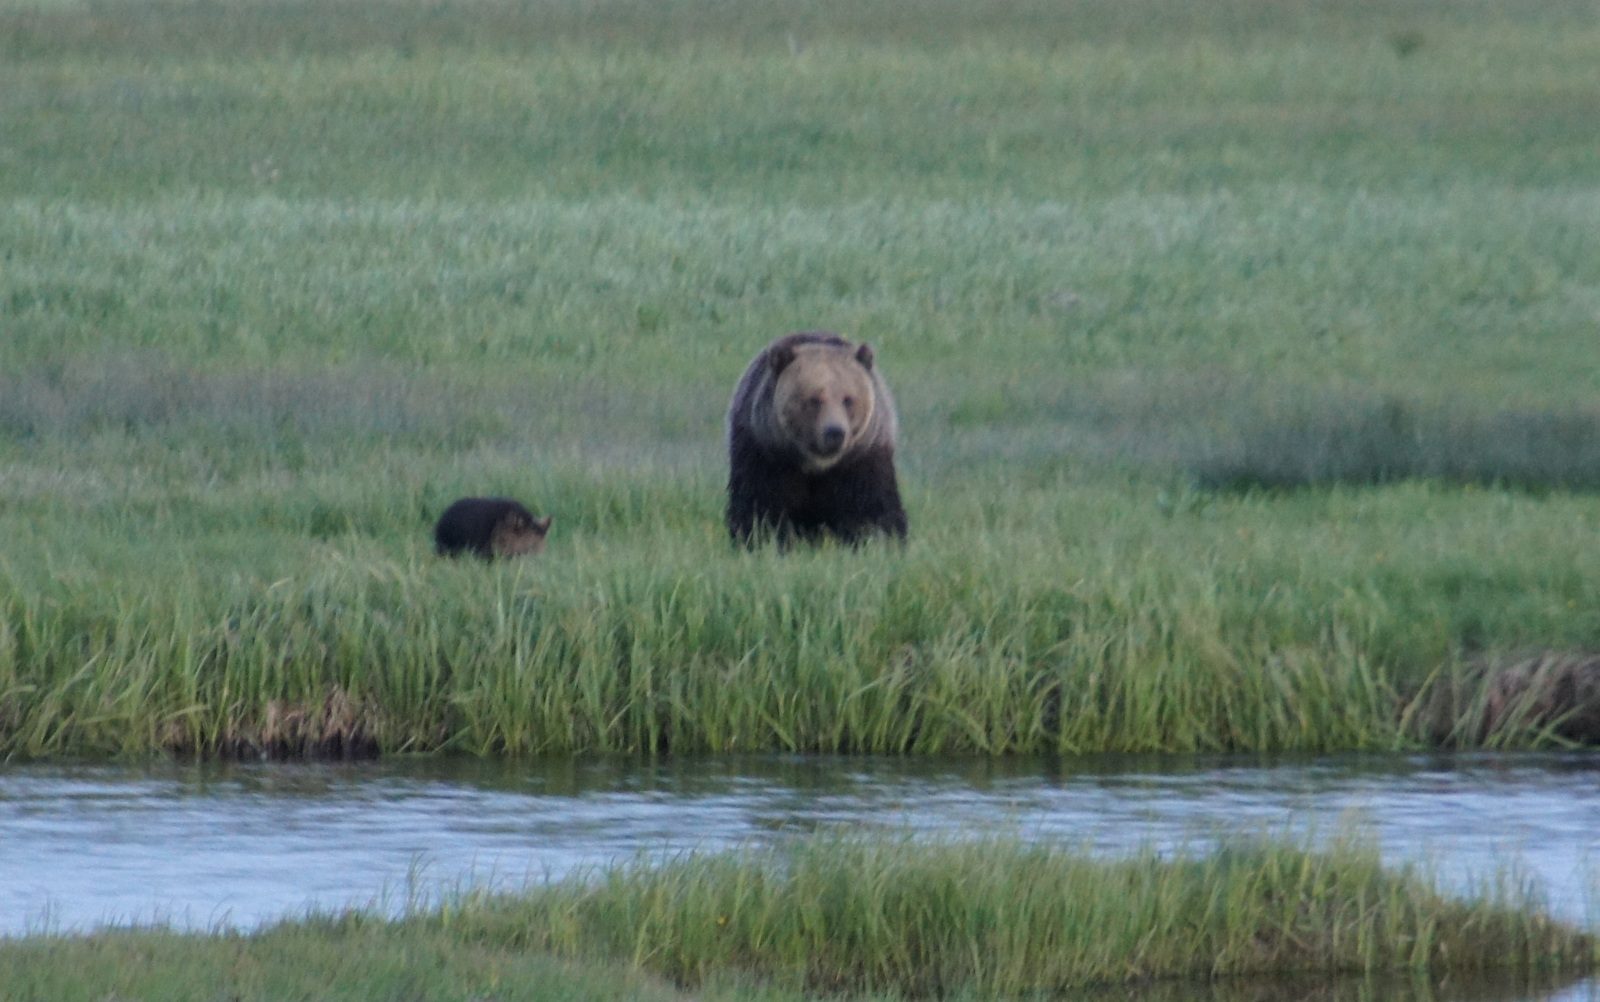 A dusk shot (not so good, sorry) of a mama grizzly and her tiny little cub. I didn't want to get any closer than this for the shot!